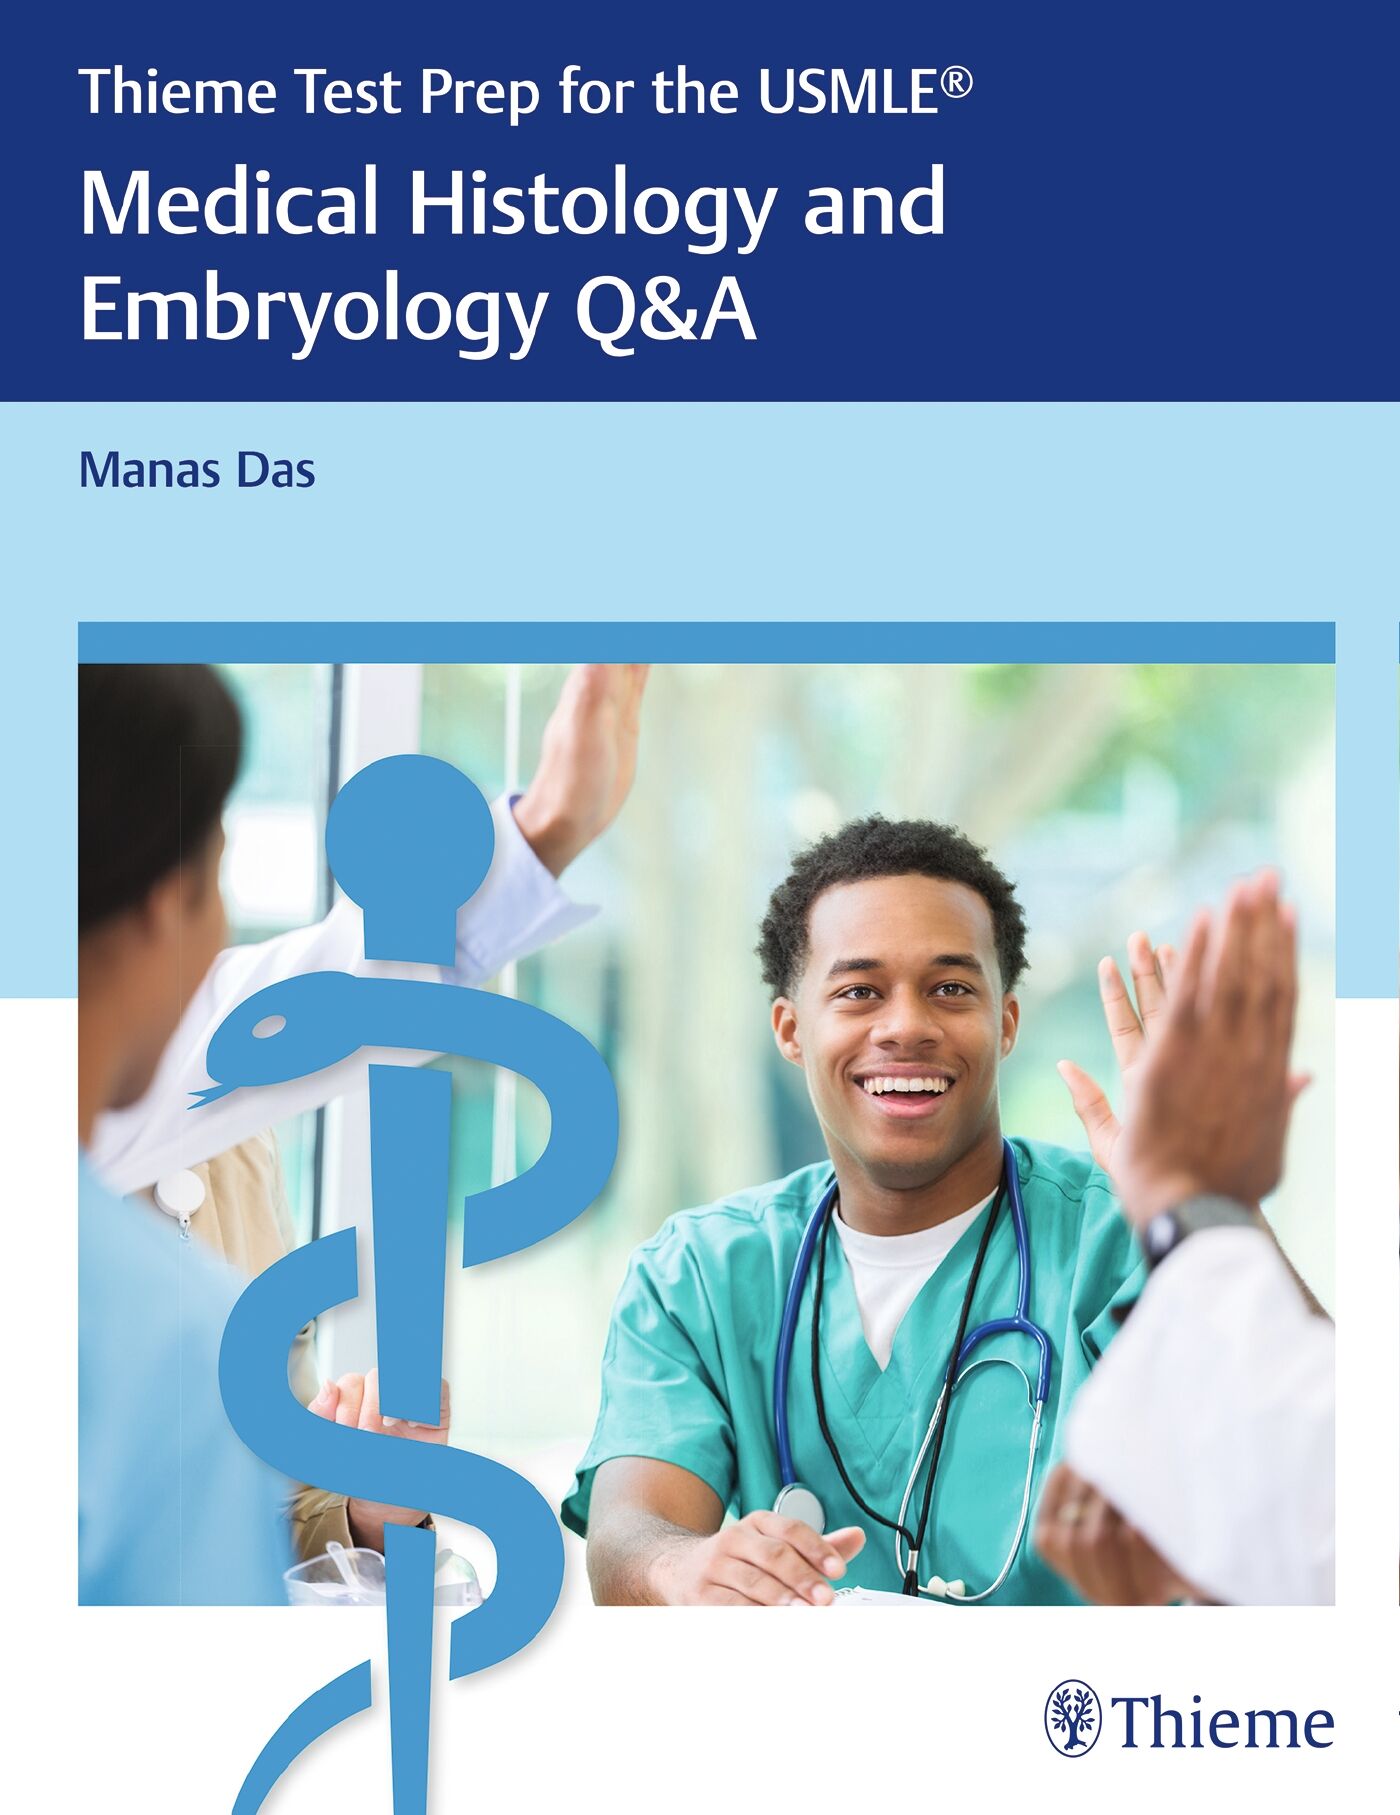 Thieme Test Prep for the USMLE®: Medical Histology and Embryology Q&A, 9781626233348